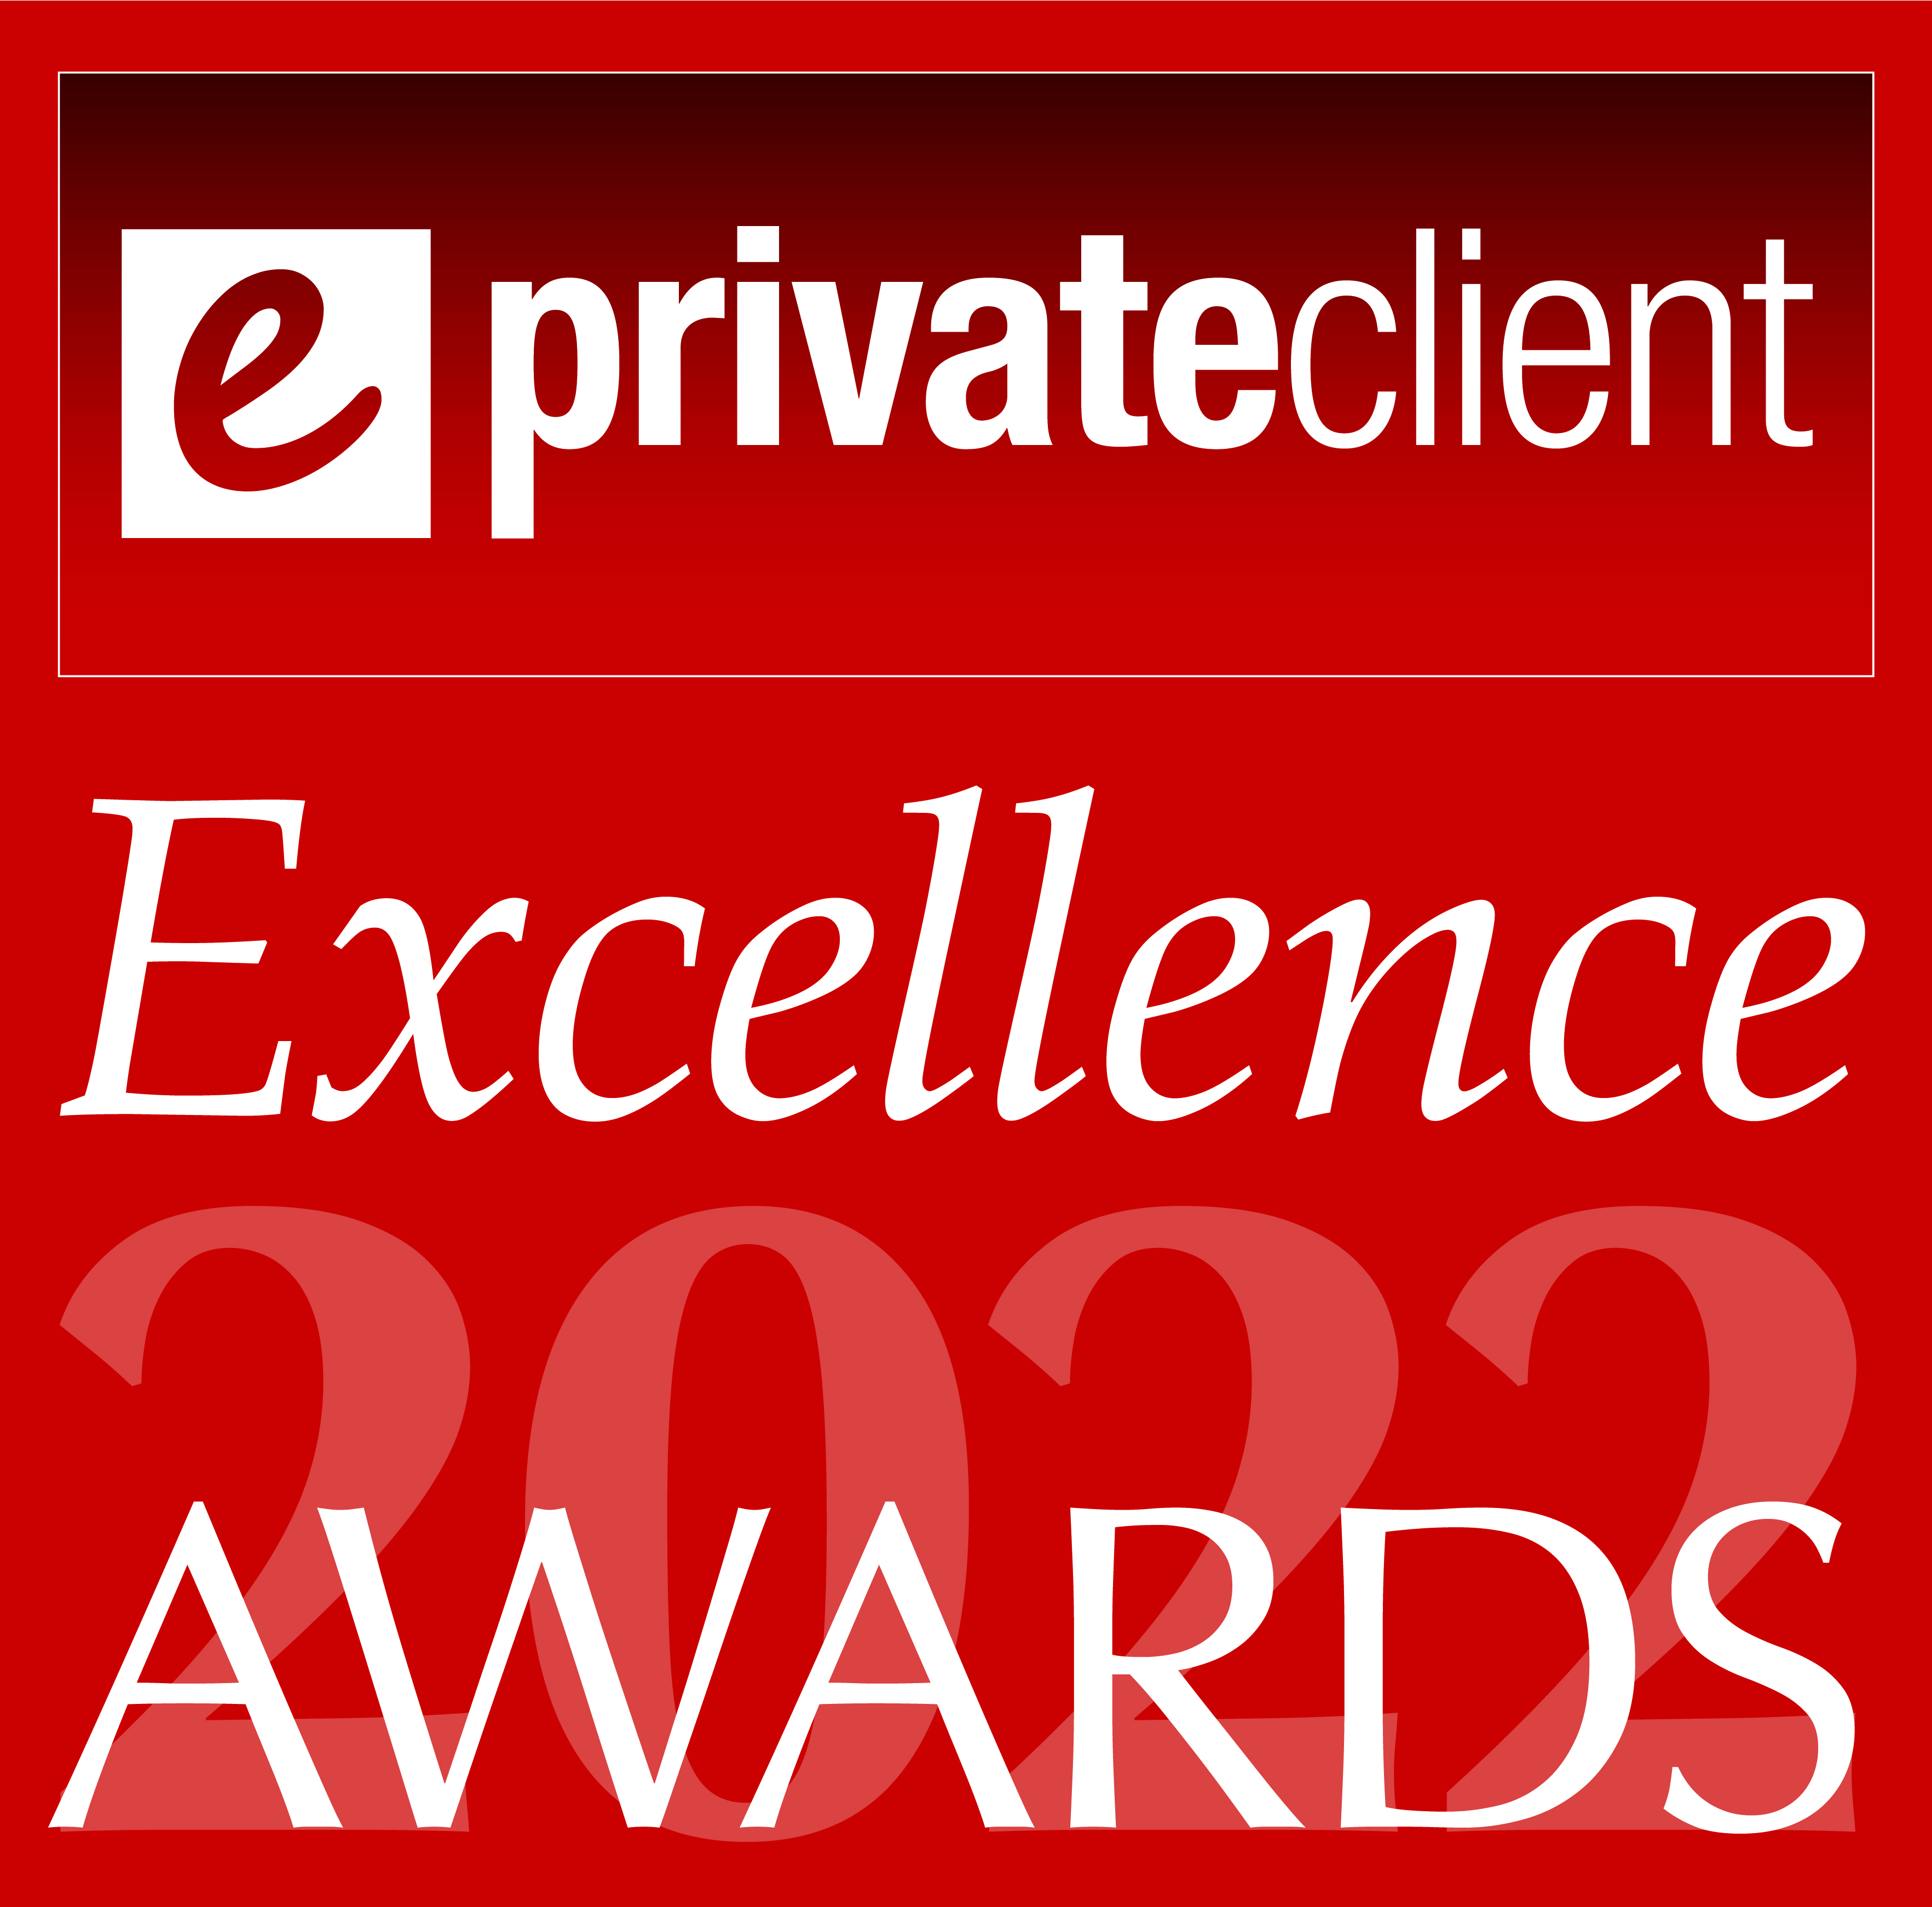 2022 eprivateclient Excellence Awards: The full list of winners & finalists